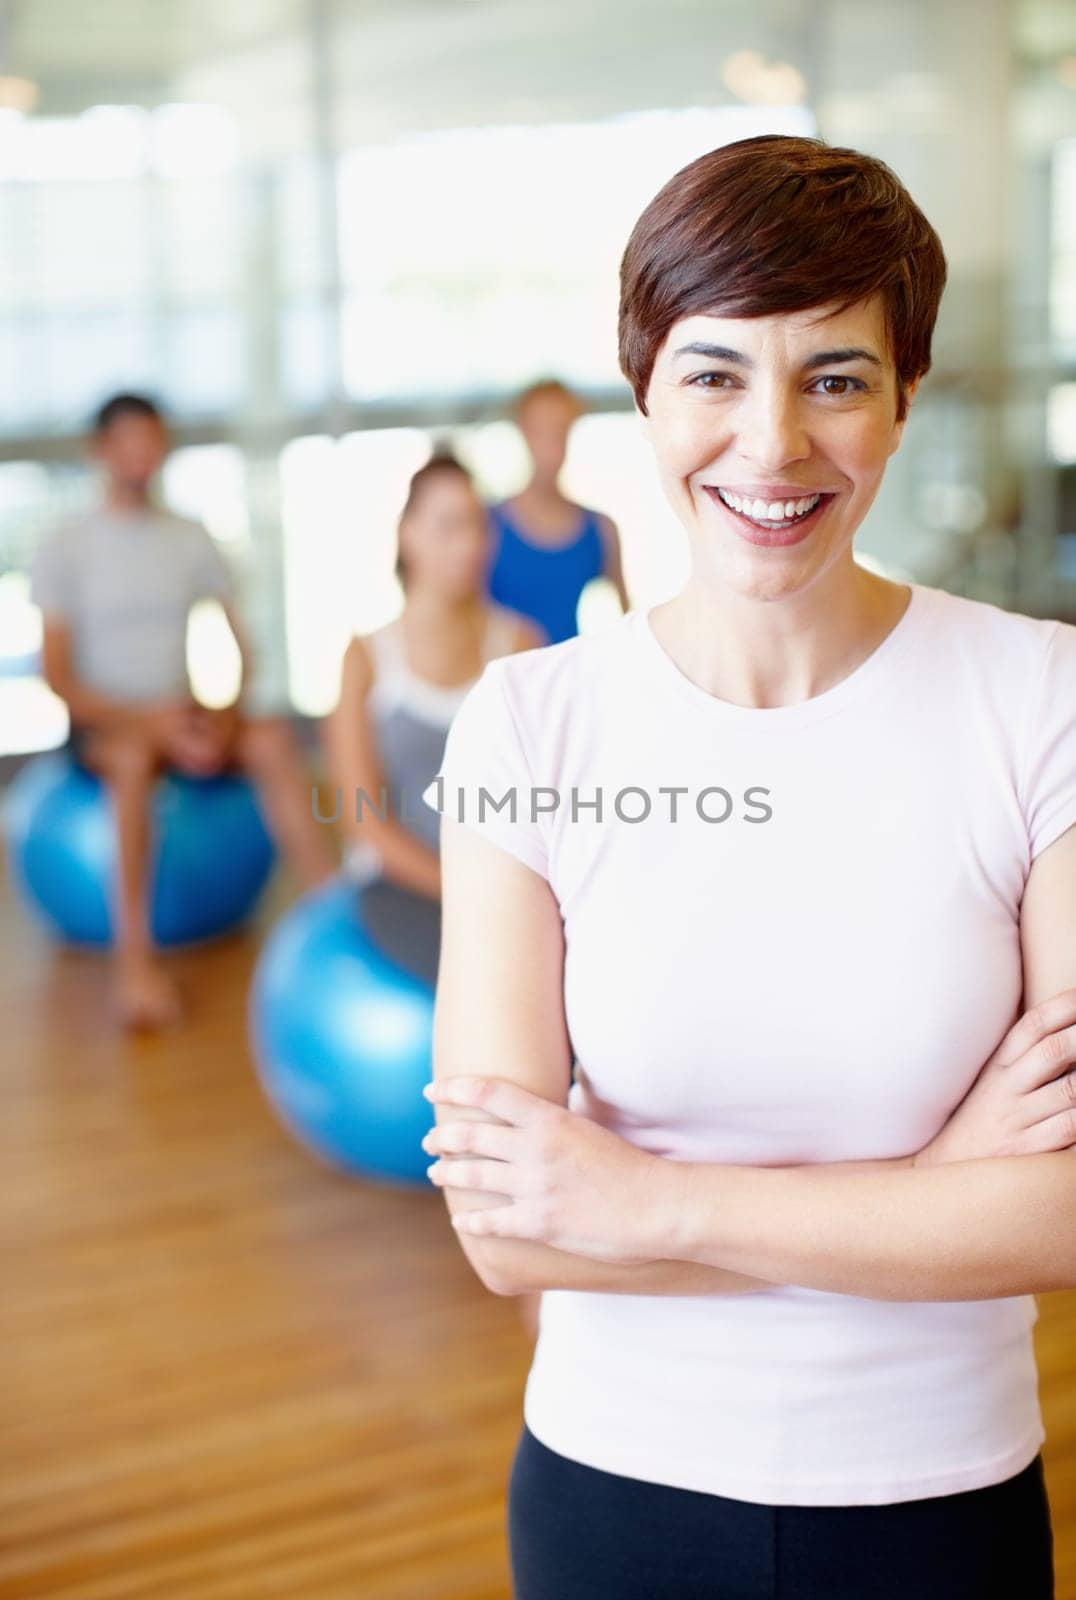 Woman in fitness club. Portrait of fitness trainer with people practicing yoga in background